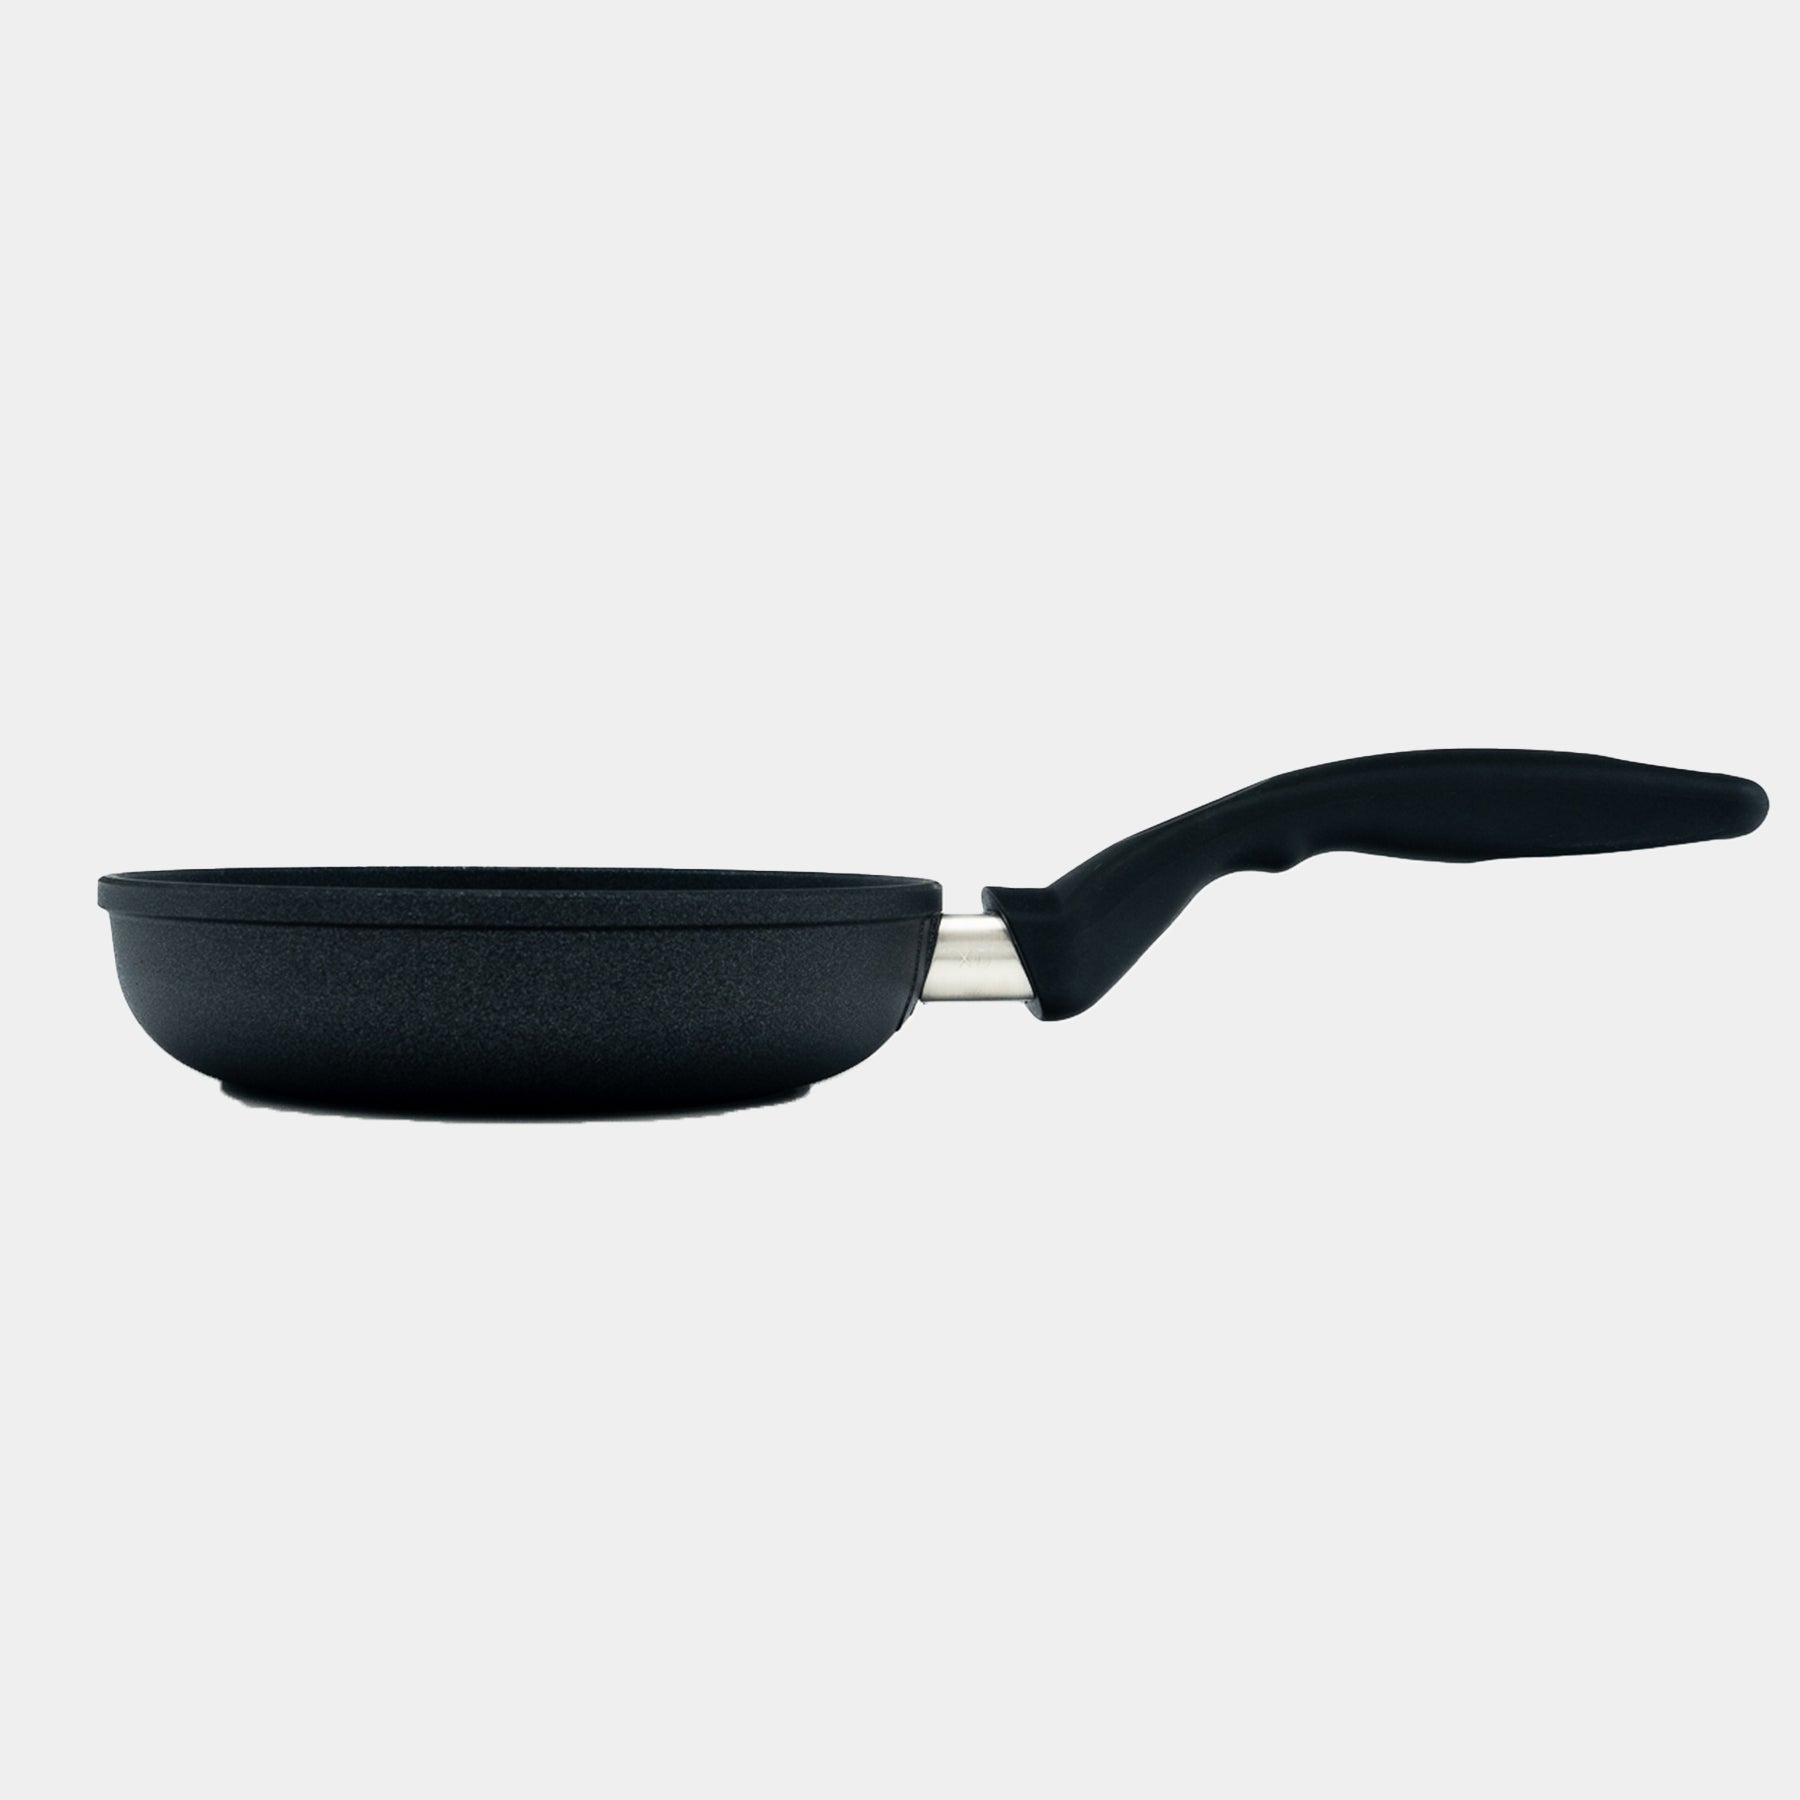 XD Nonstick Fry Pan 7" side view